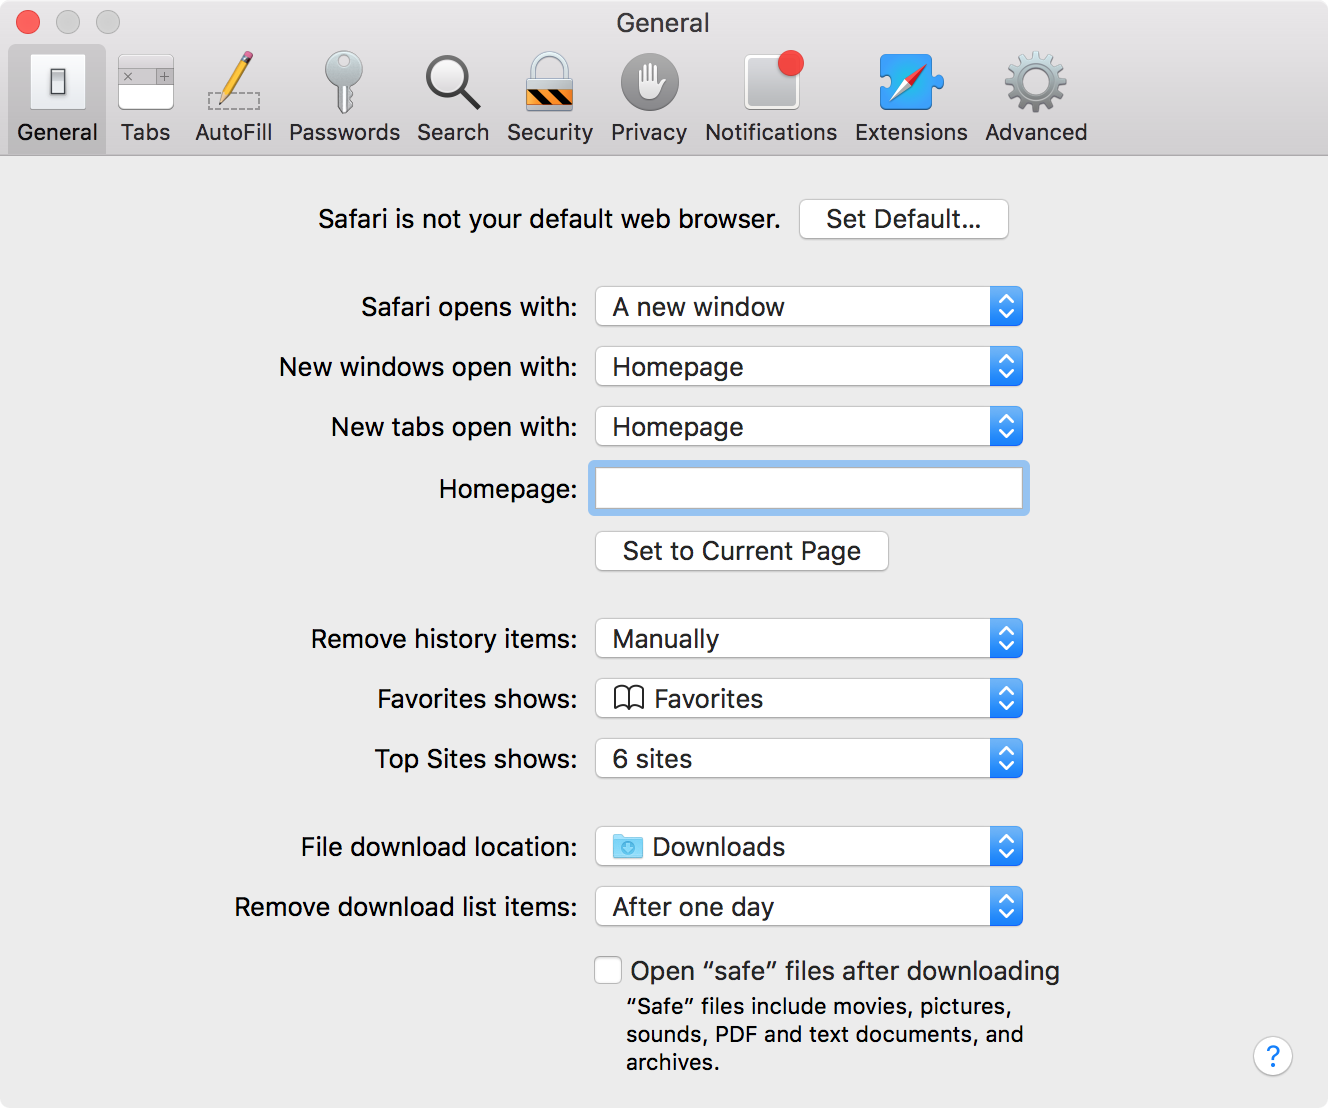 How To Set Up An Image As Your Home Page In Safari On Mac